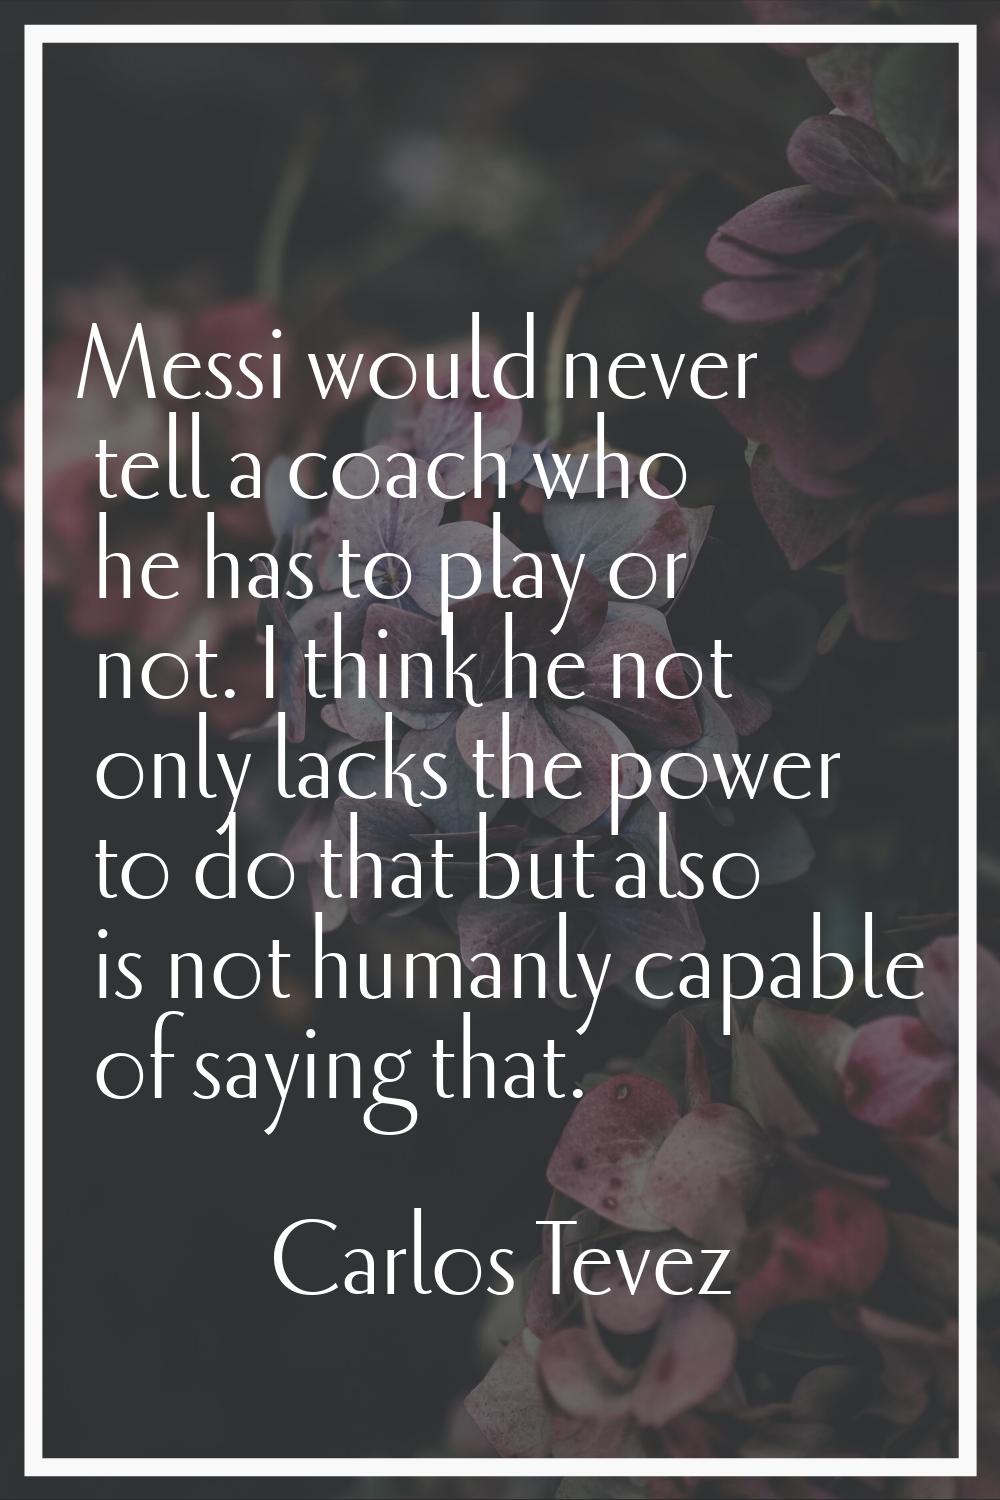 Messi would never tell a coach who he has to play or not. I think he not only lacks the power to do